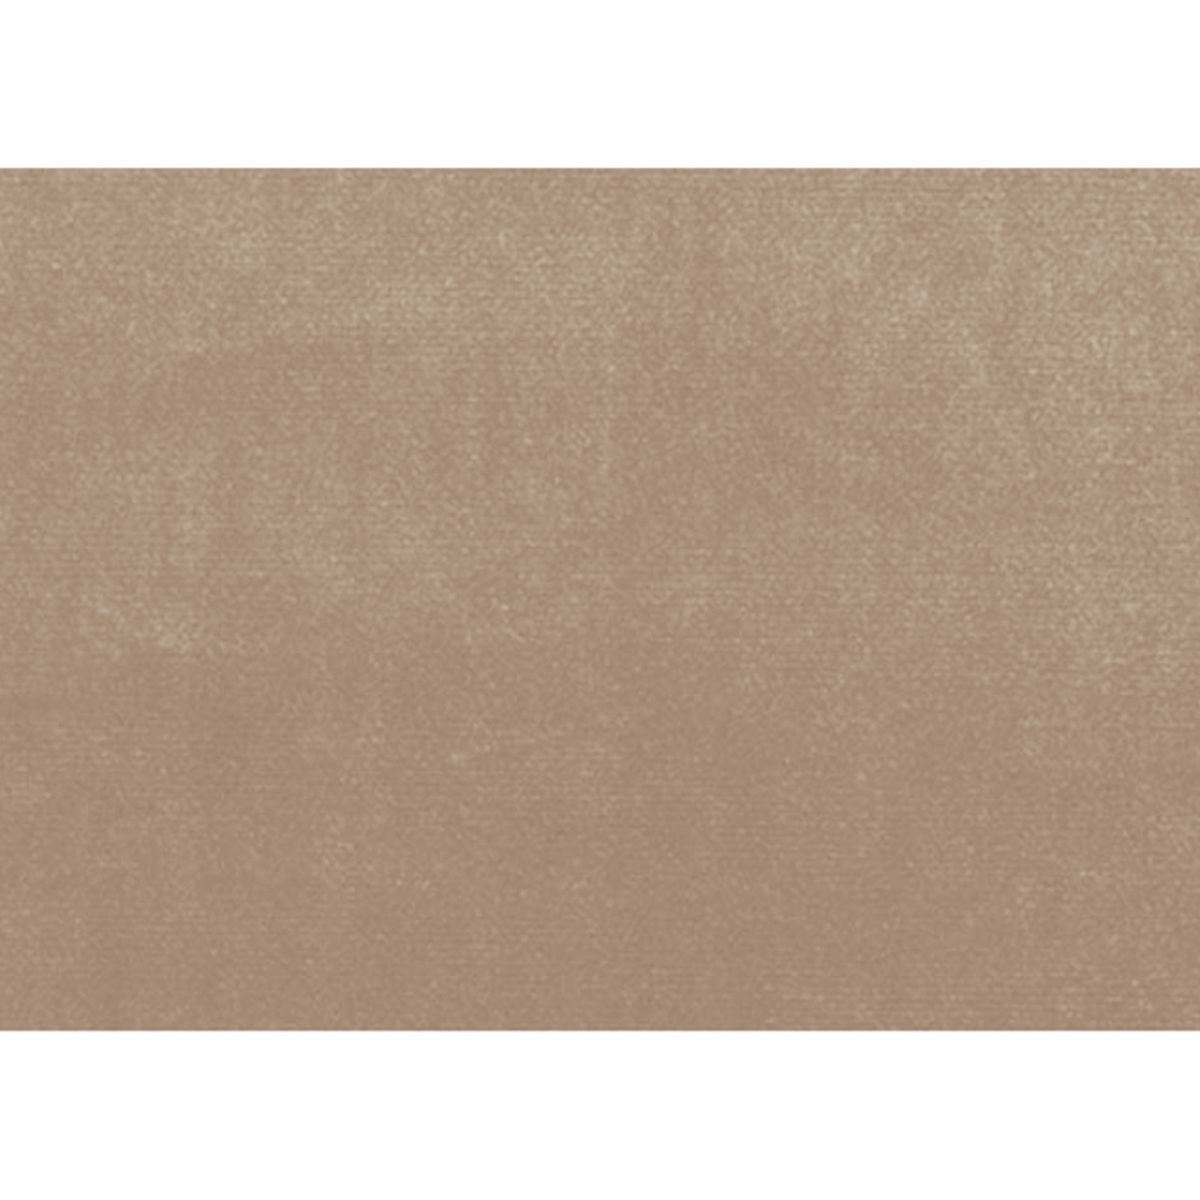 Rouleau adhsif Velours Taupe 45 x 150 cm